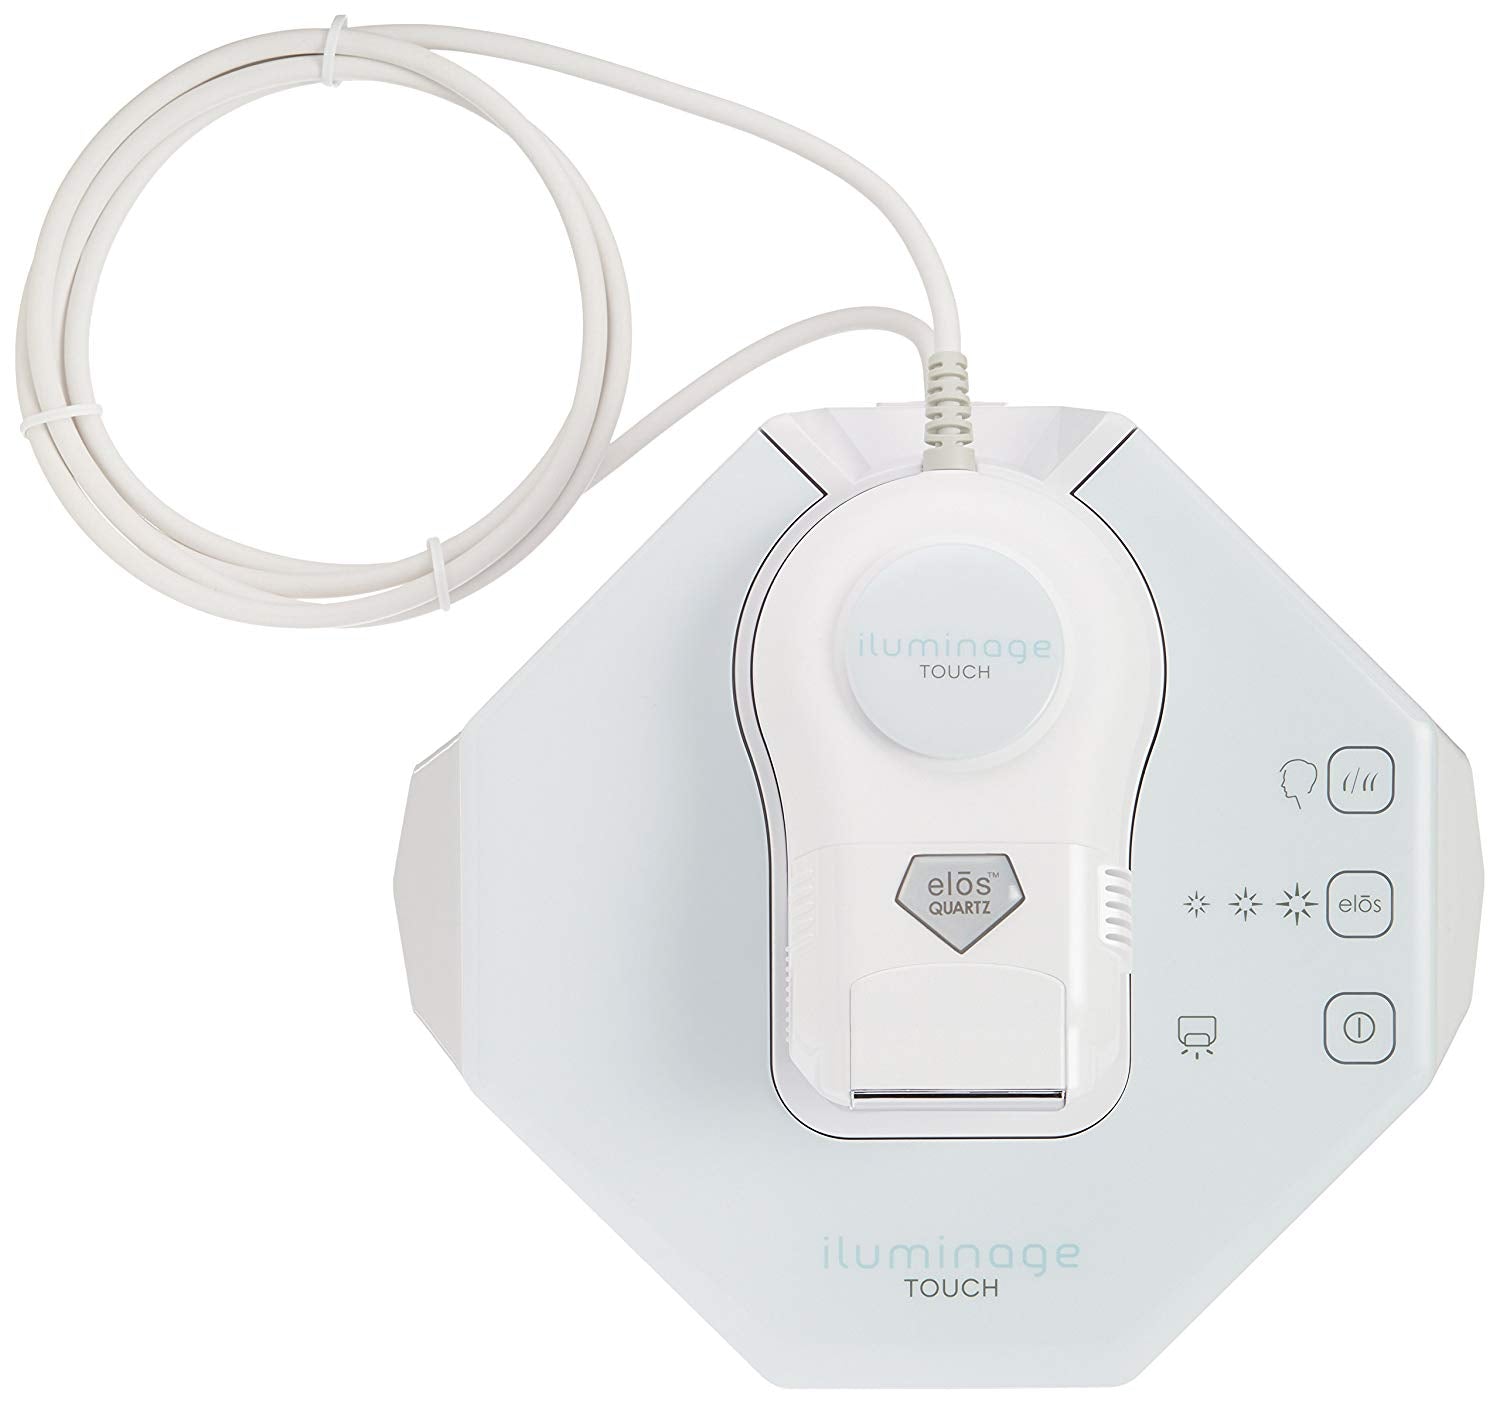 Iluminage Touch 4ever Home Permanent Hair Removal IPL & Radio Frequency System (FDA-Cleared)